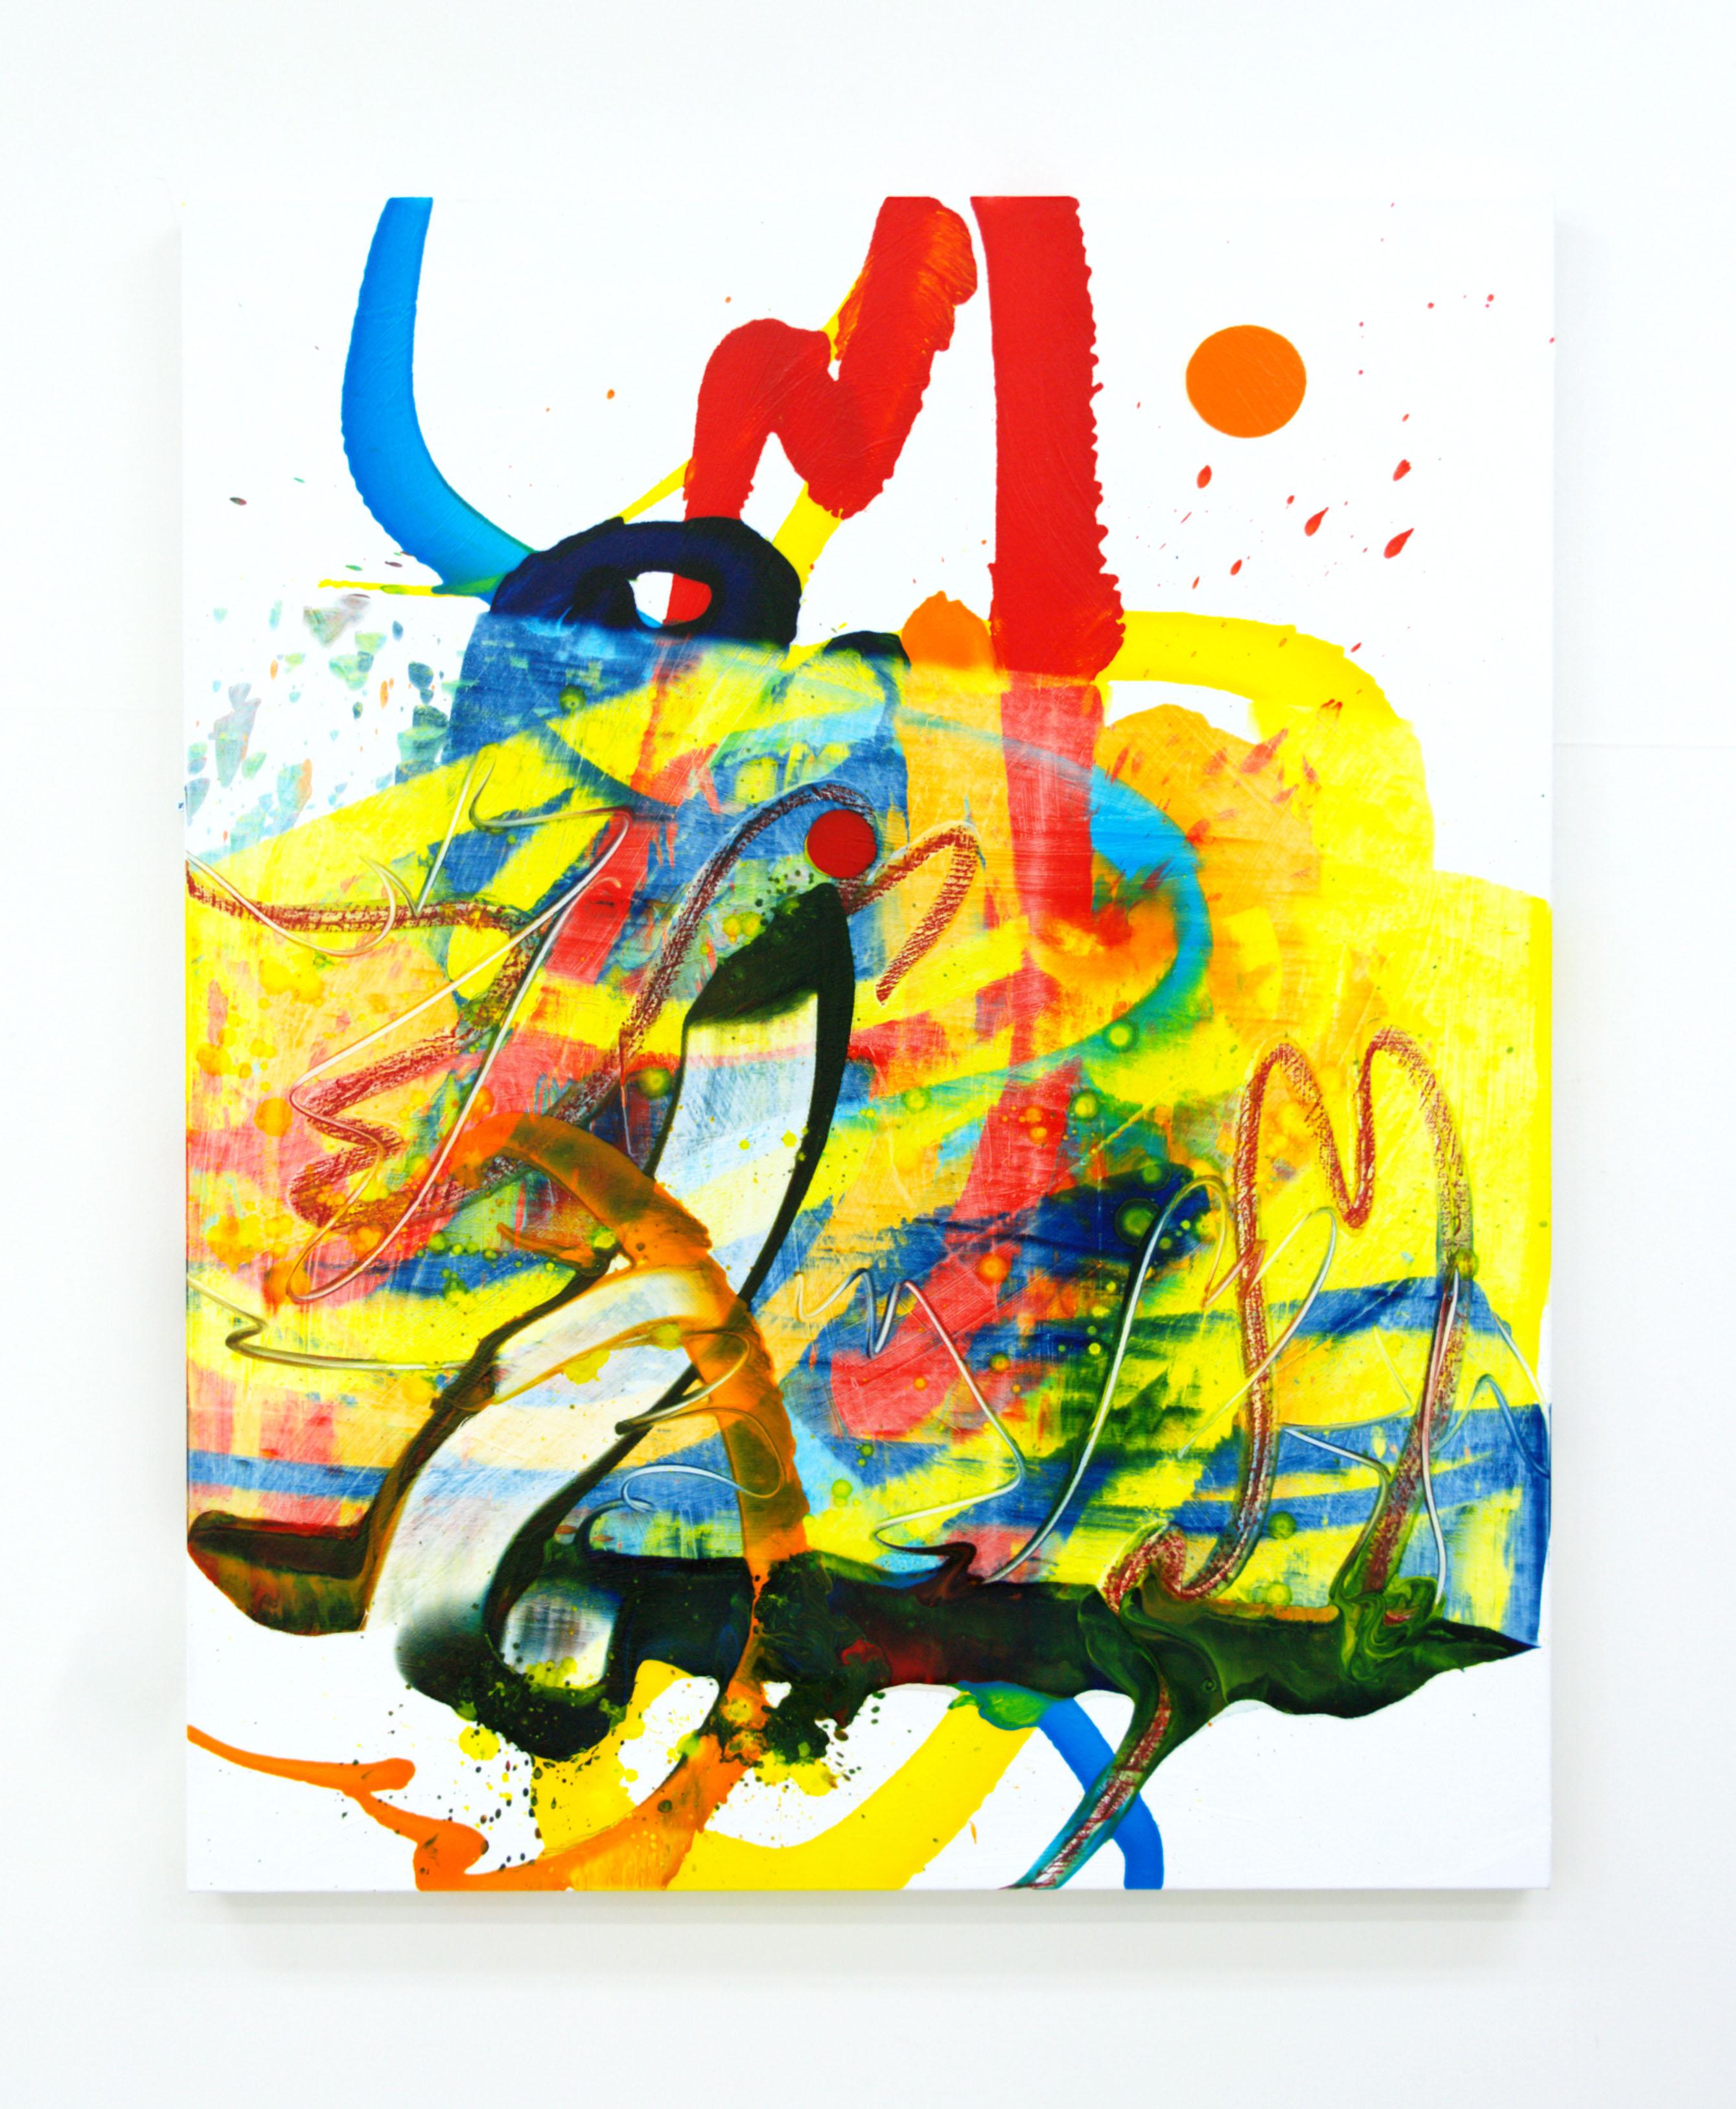 Seungyoon Choi Abstract Painting - Cross-section of the moment 39, Abstract Expressionist Oil Painting Yellow Red